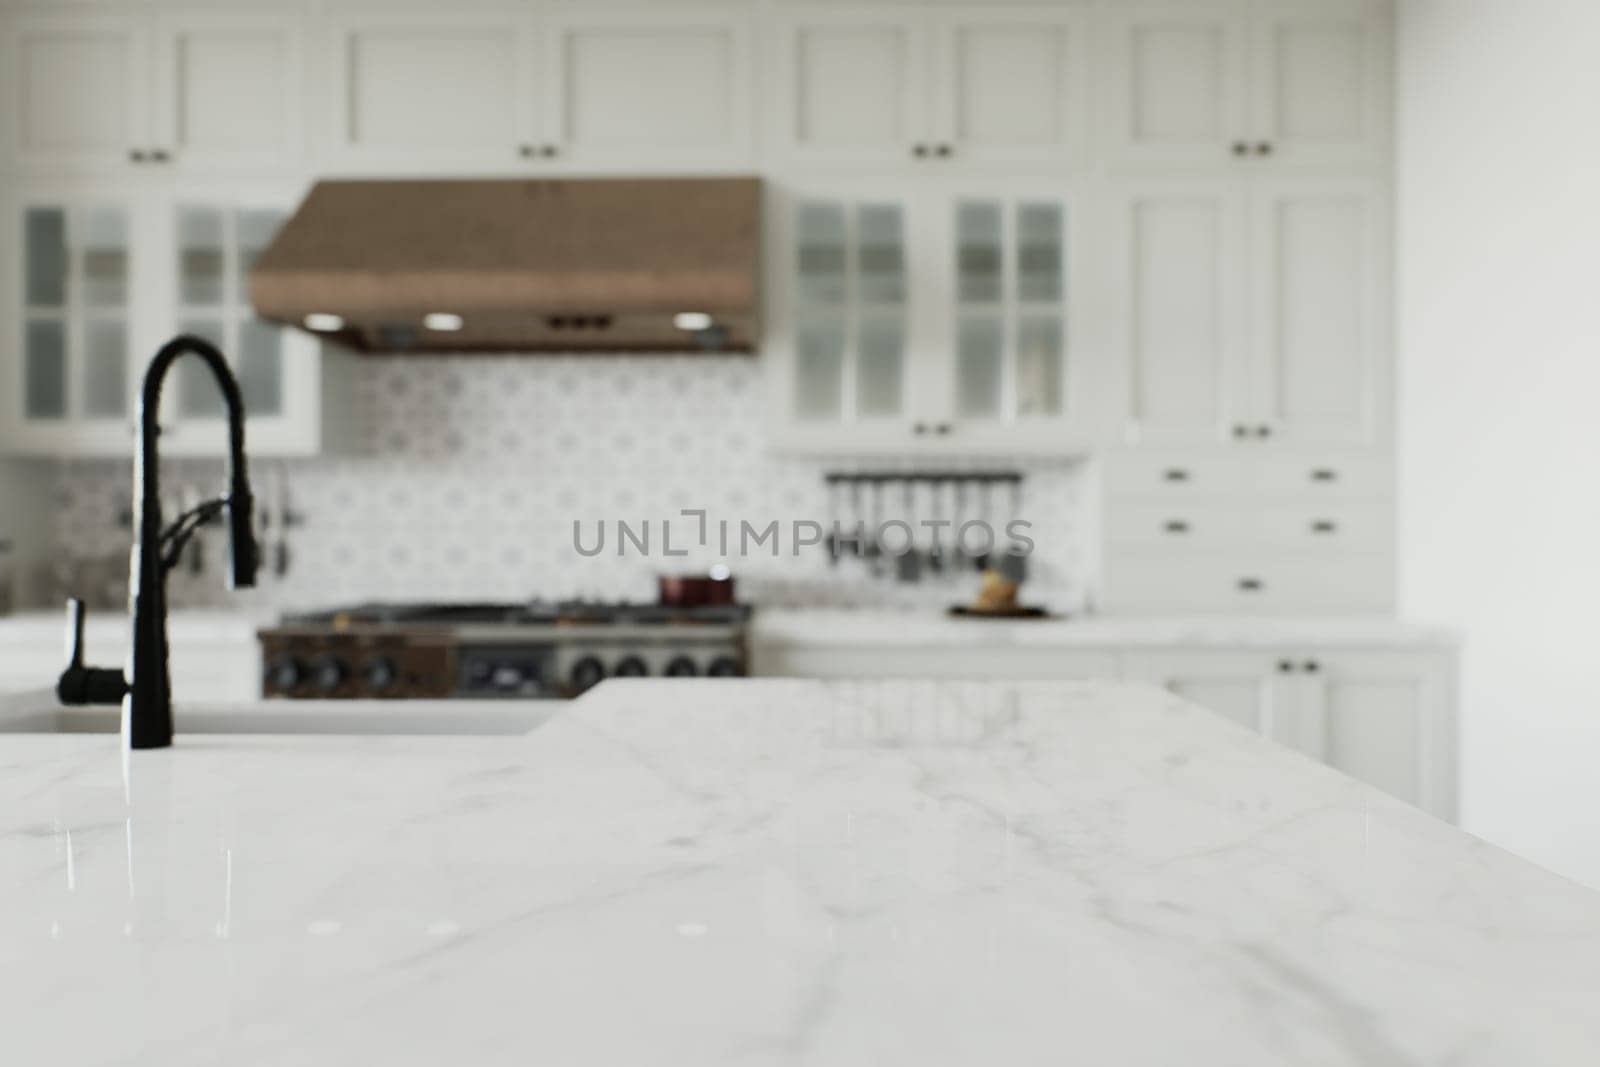 Kitchen with an emphasis on an empty countertop for arranging kitchen utensils. Kitchen interior with white cabinets and wooden island. 3D rendering